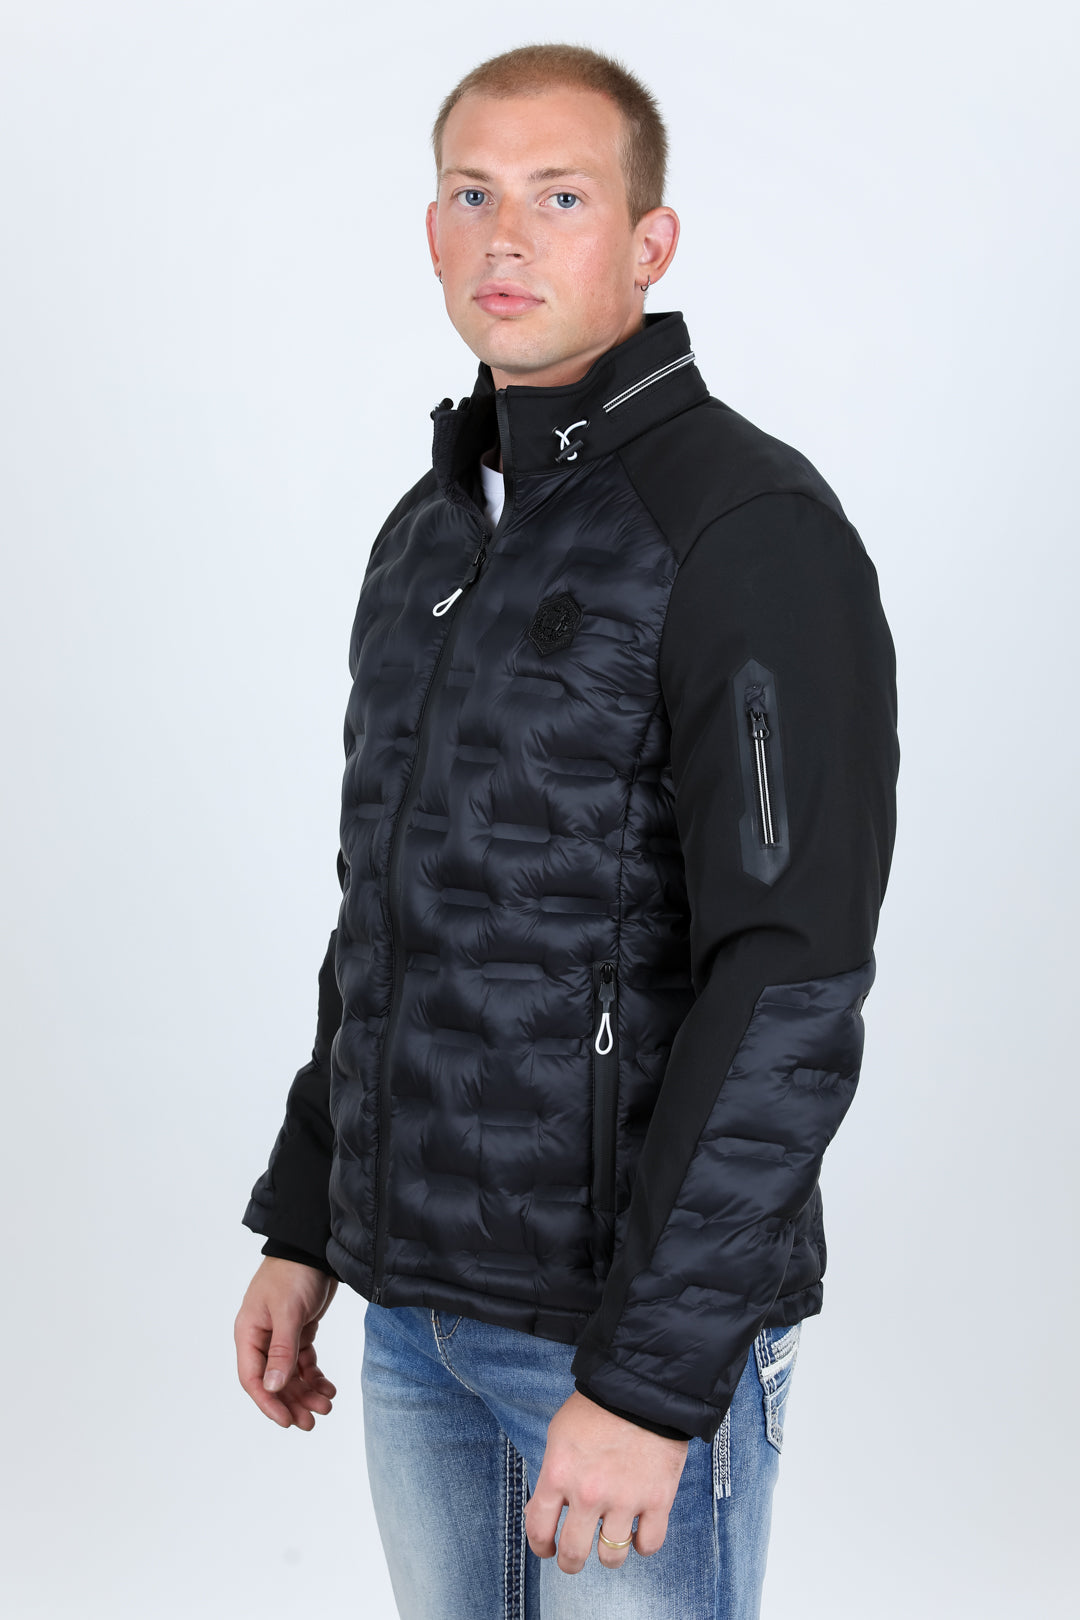 Men's Insulated Lightweight Water-Resistant Softshell Jacket - Black